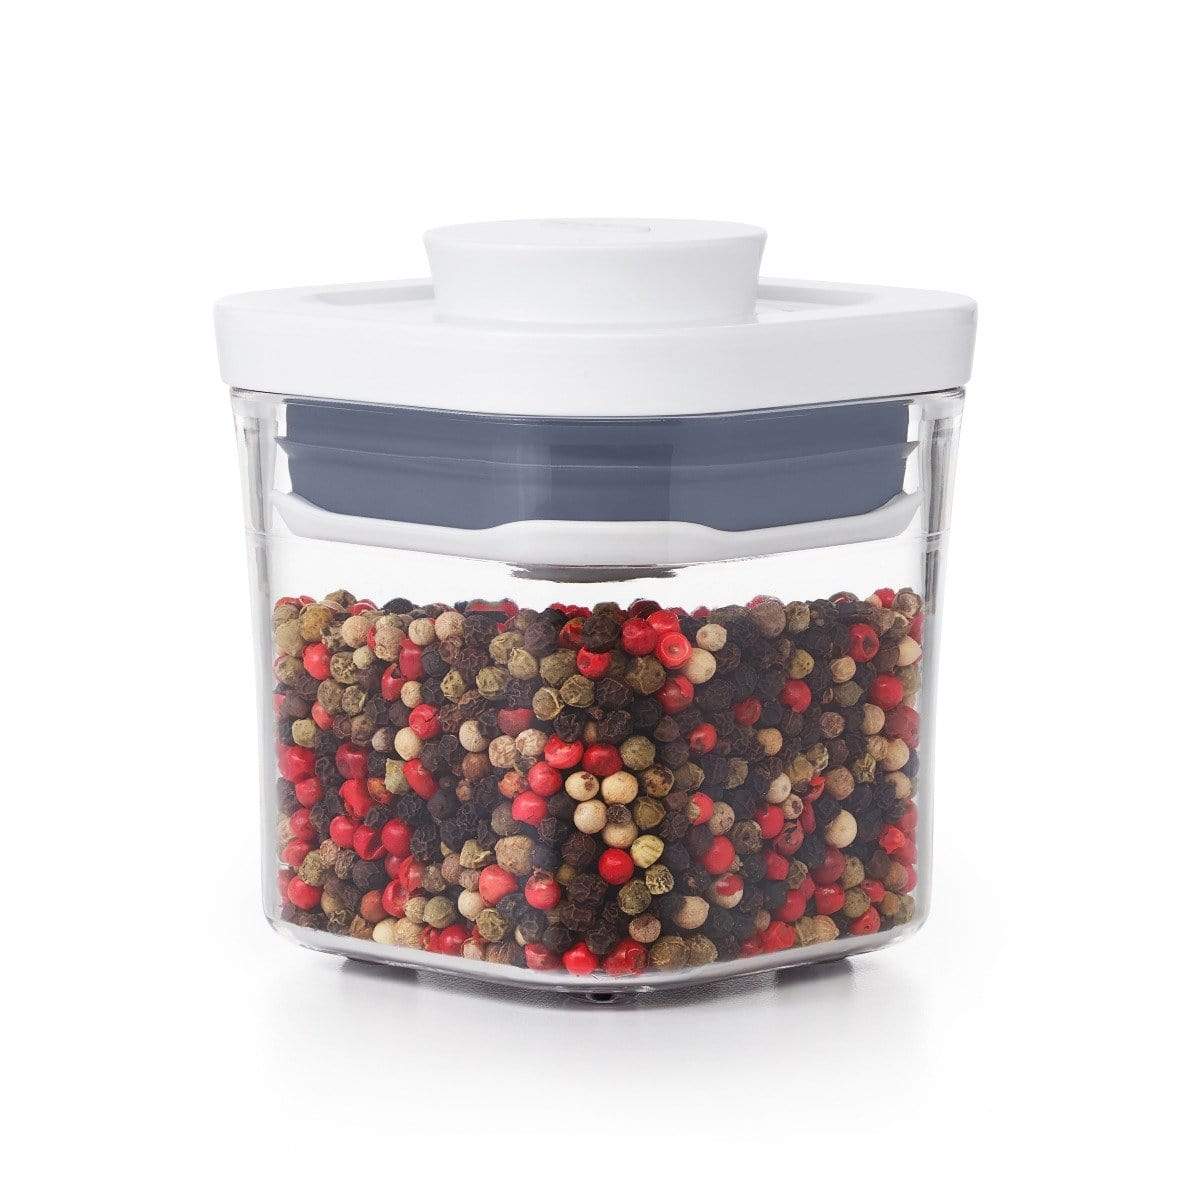 OXO Good Grips POP Container - Big Square Short 2.8 Qt